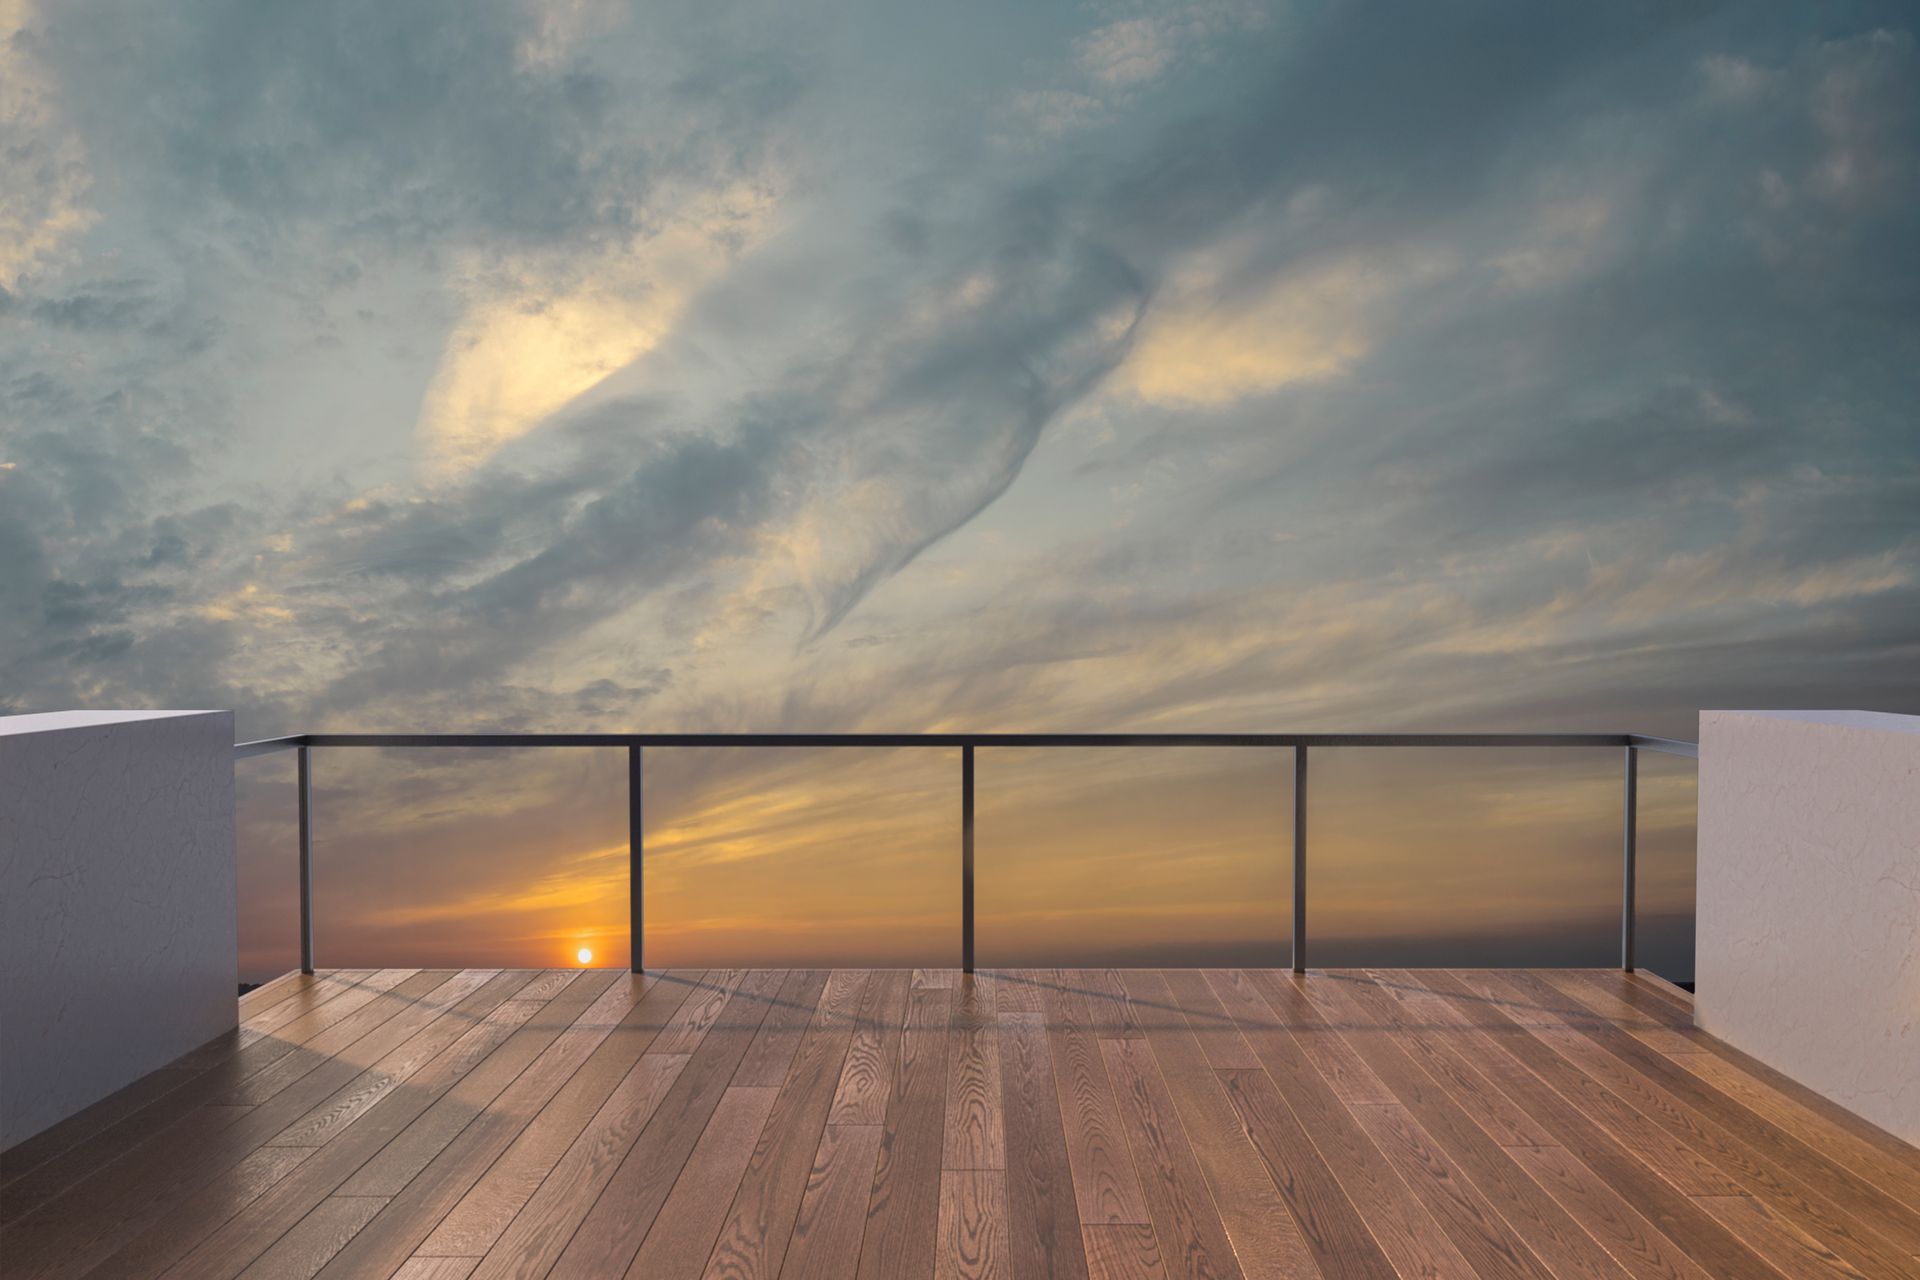  A photo of a deck railing against a sunset